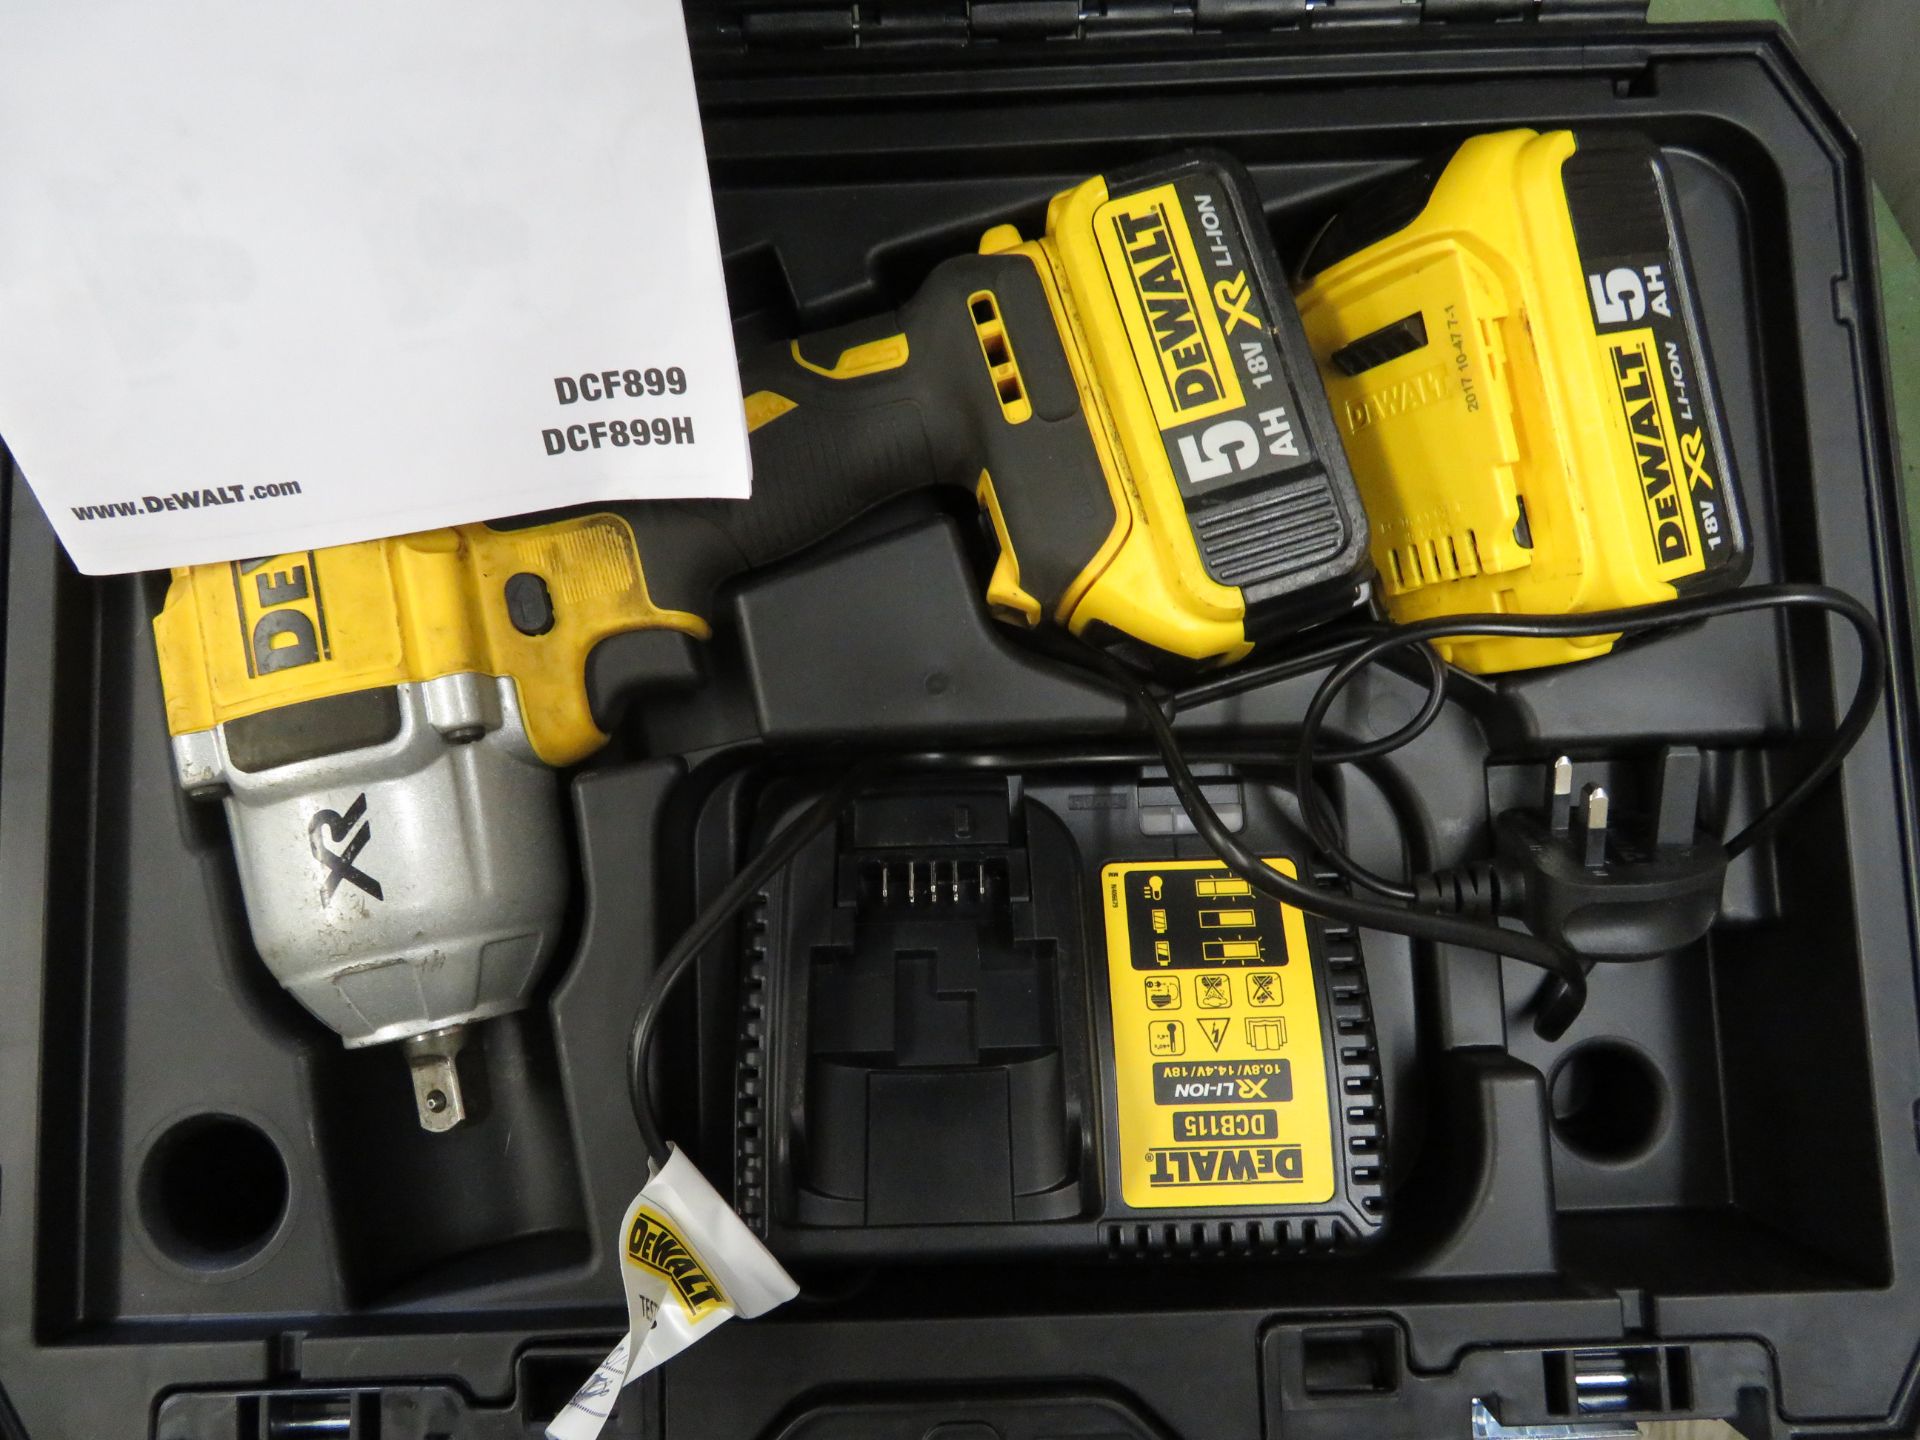 (D20) DEWALT DCF899P2-GB 18V 5.0AH LI-ION CORDLESS IMPACT WRENCH. GOOD USED CONDITION. COMES - Image 2 of 3